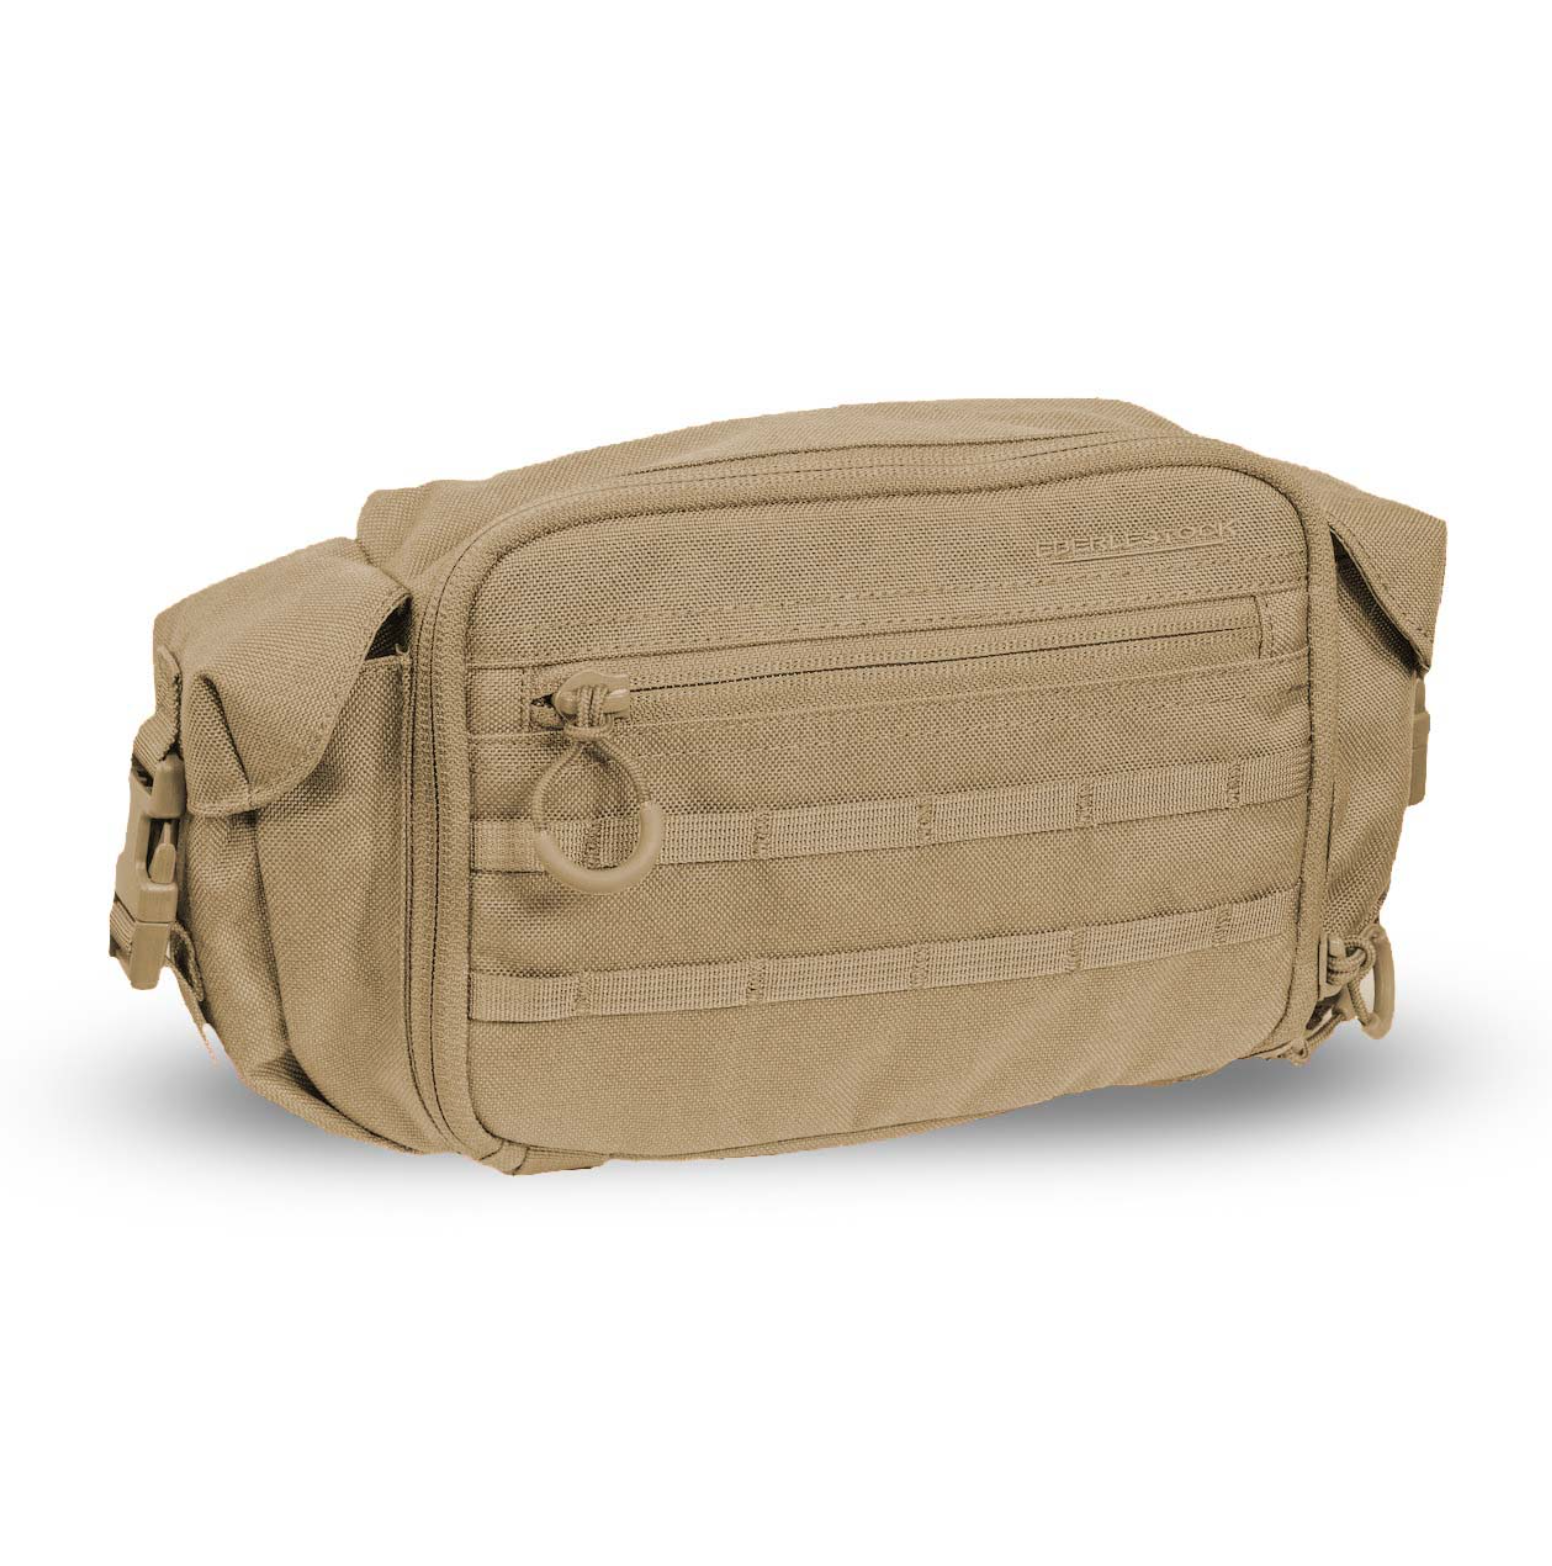 EBERLESTOCK MULTIPACK ACCESSORY POUCH, DRY EARTH